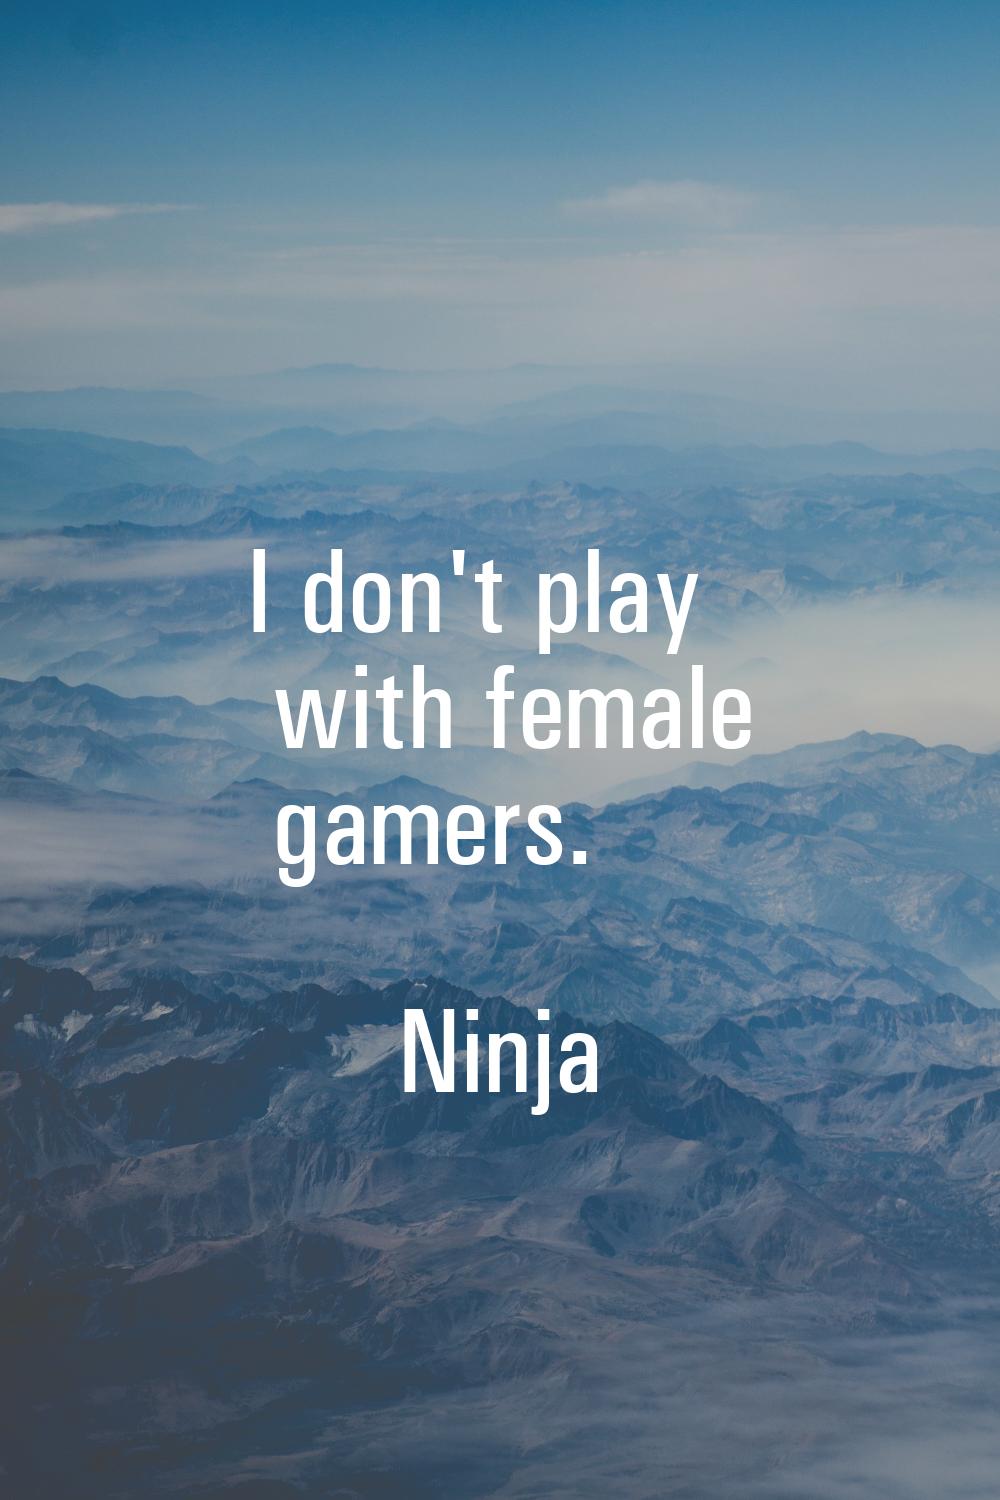 I don't play with female gamers.